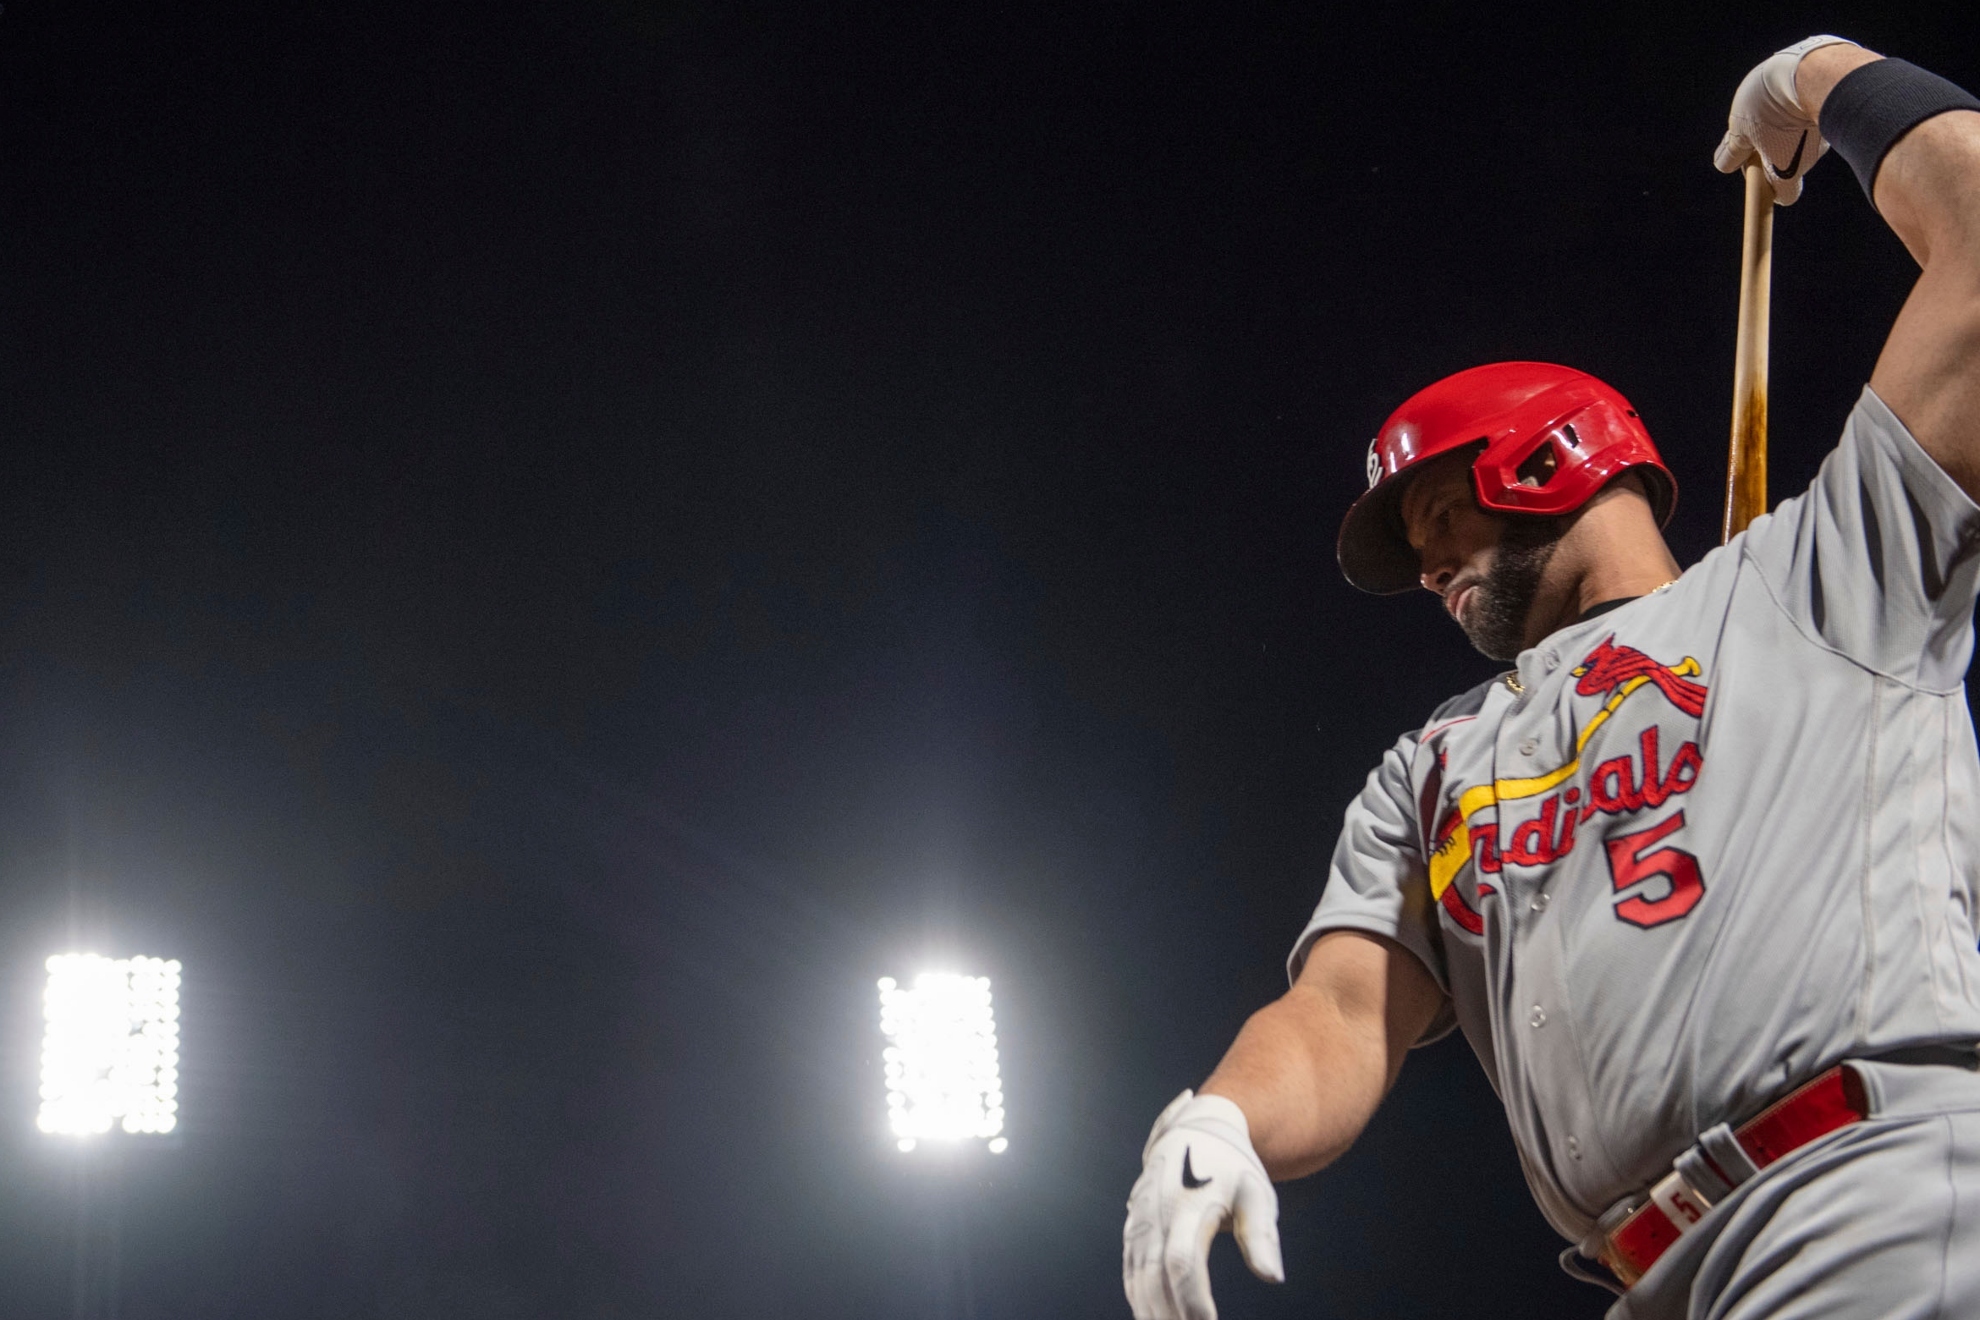 The Cardinals' Albert Pujols warms up before stepping up to the plate on Monday, Oct. 3, 2022, at a baseball game against the Pittsburgh Pirates in Pittsburgh. / AP